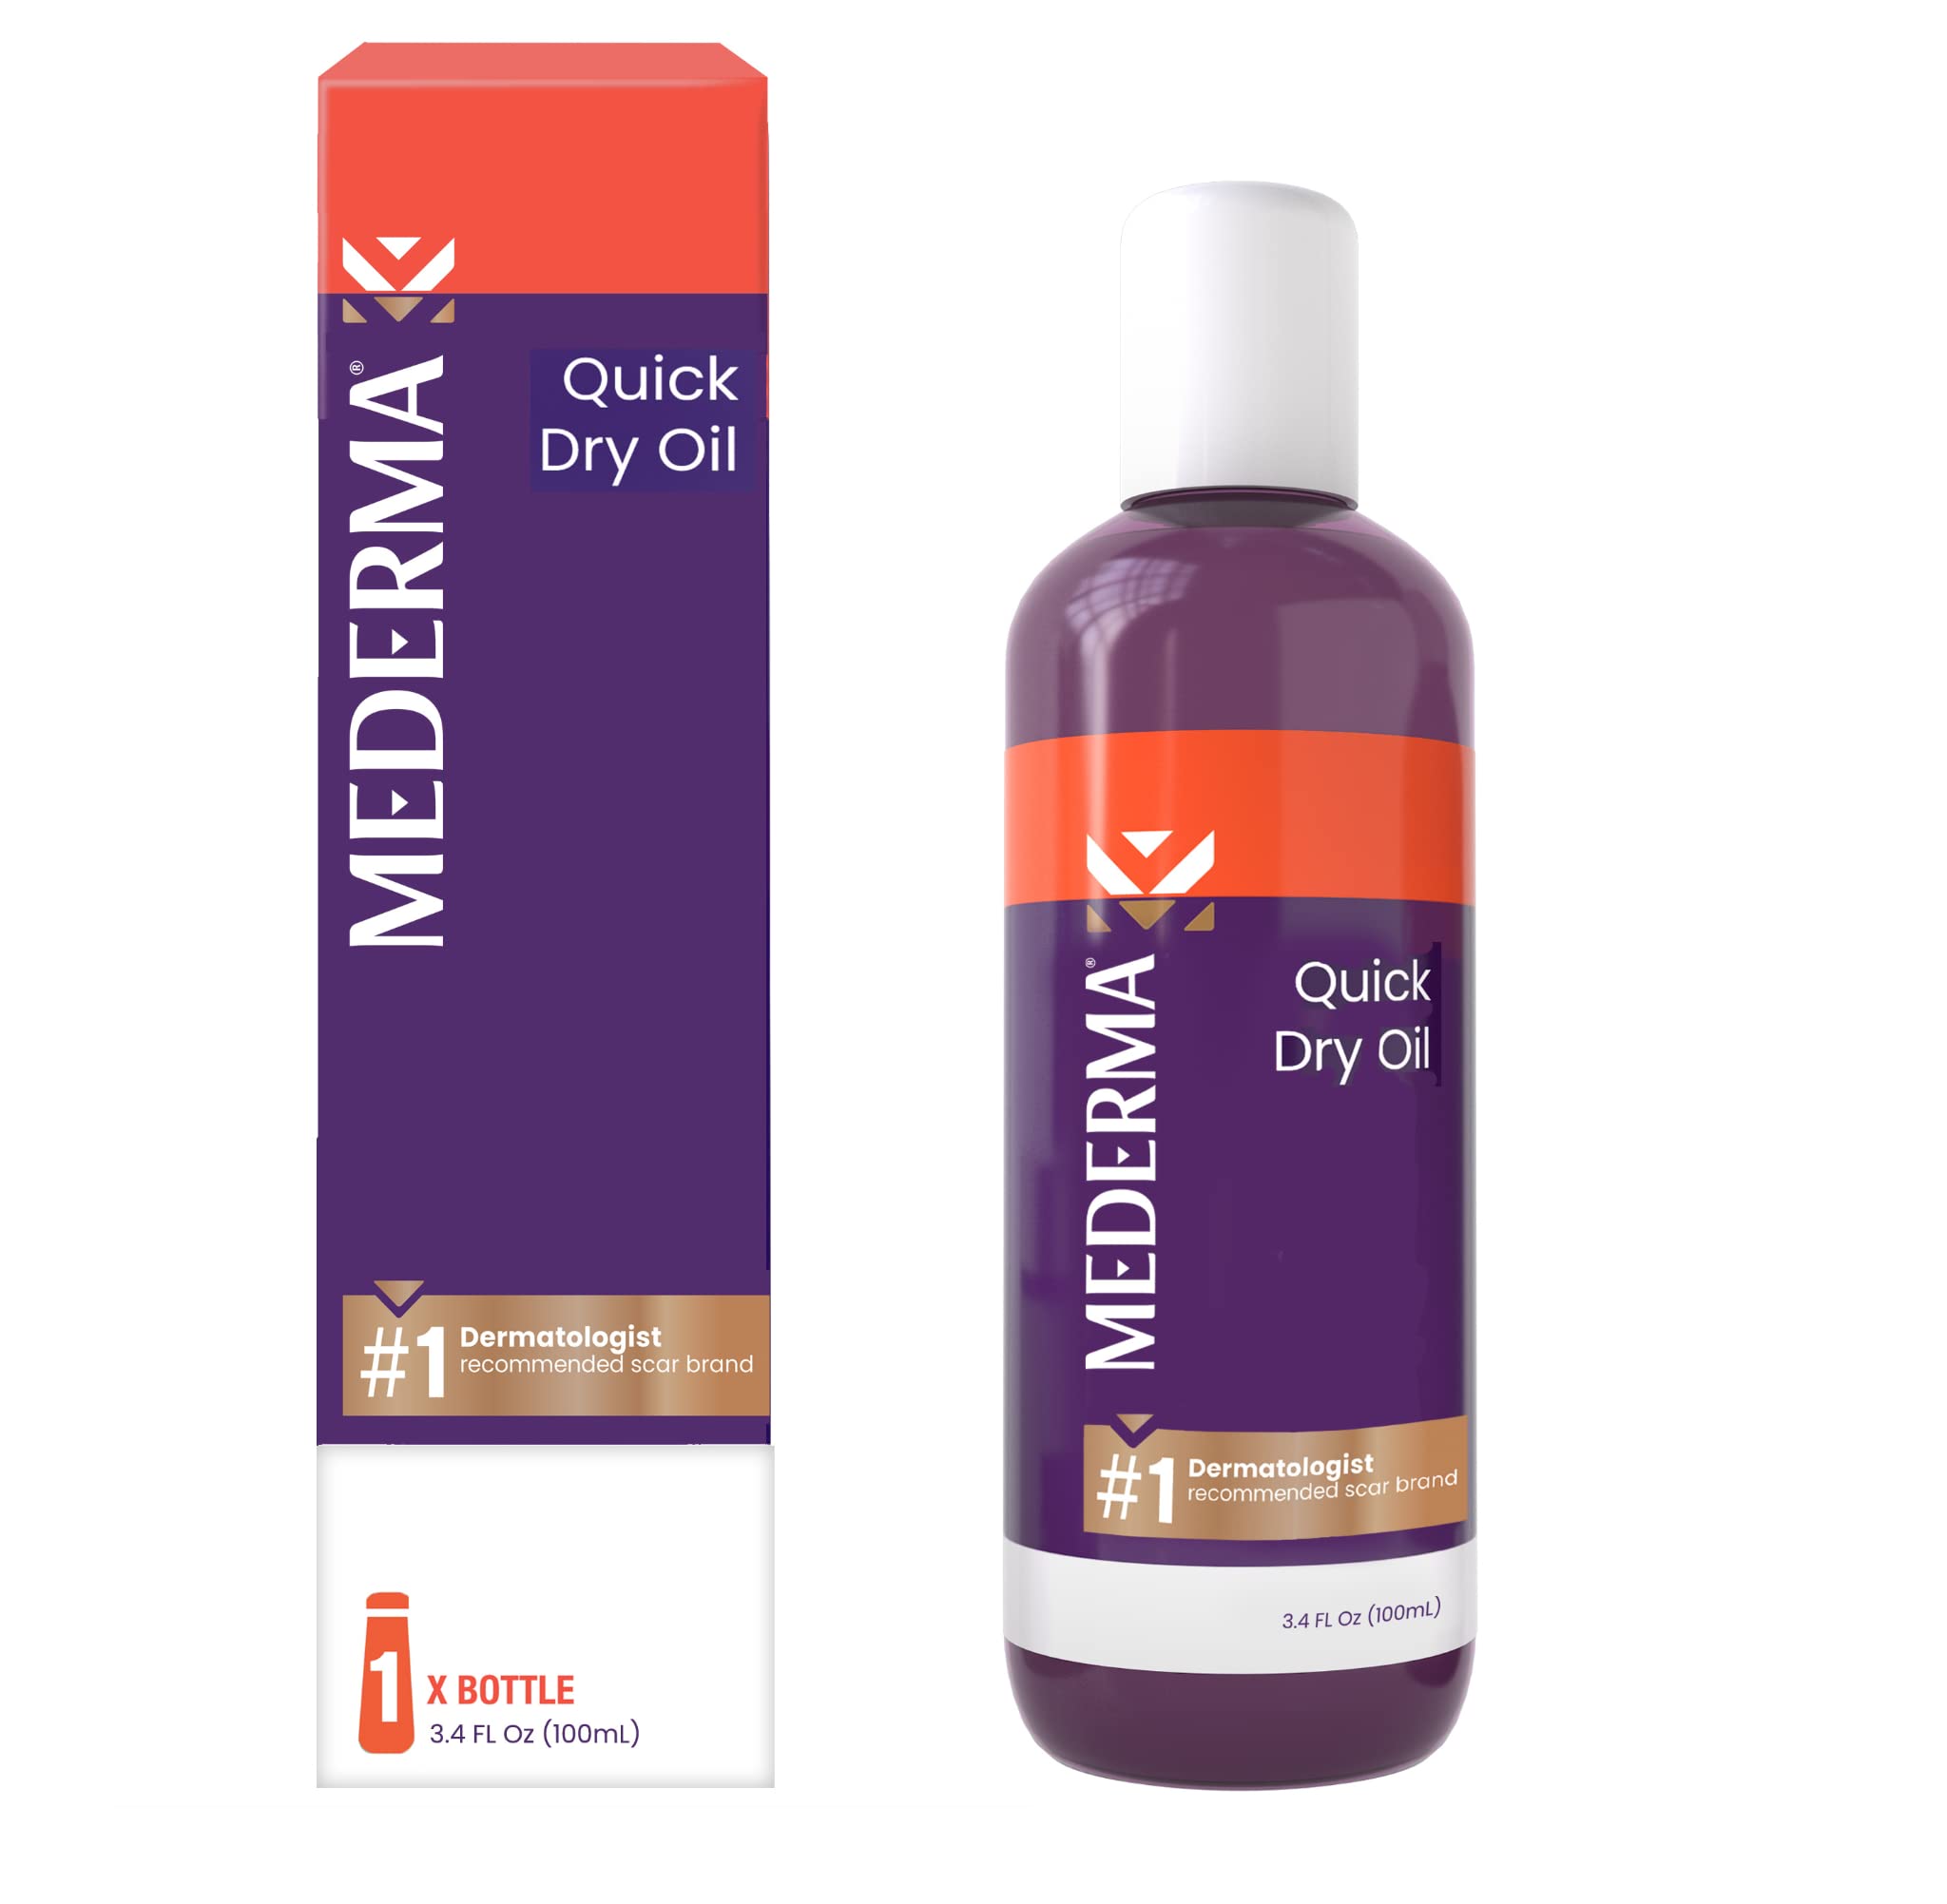 Mederma Quick Dry Oil, Scar and Stretch Mark Treatment, Helps to Improve the Appearance of Scars and Stretch Marks, with Natural Botanical Extracts, Paraben Free, Fast-Absorbing, 3.4oz (100ml)